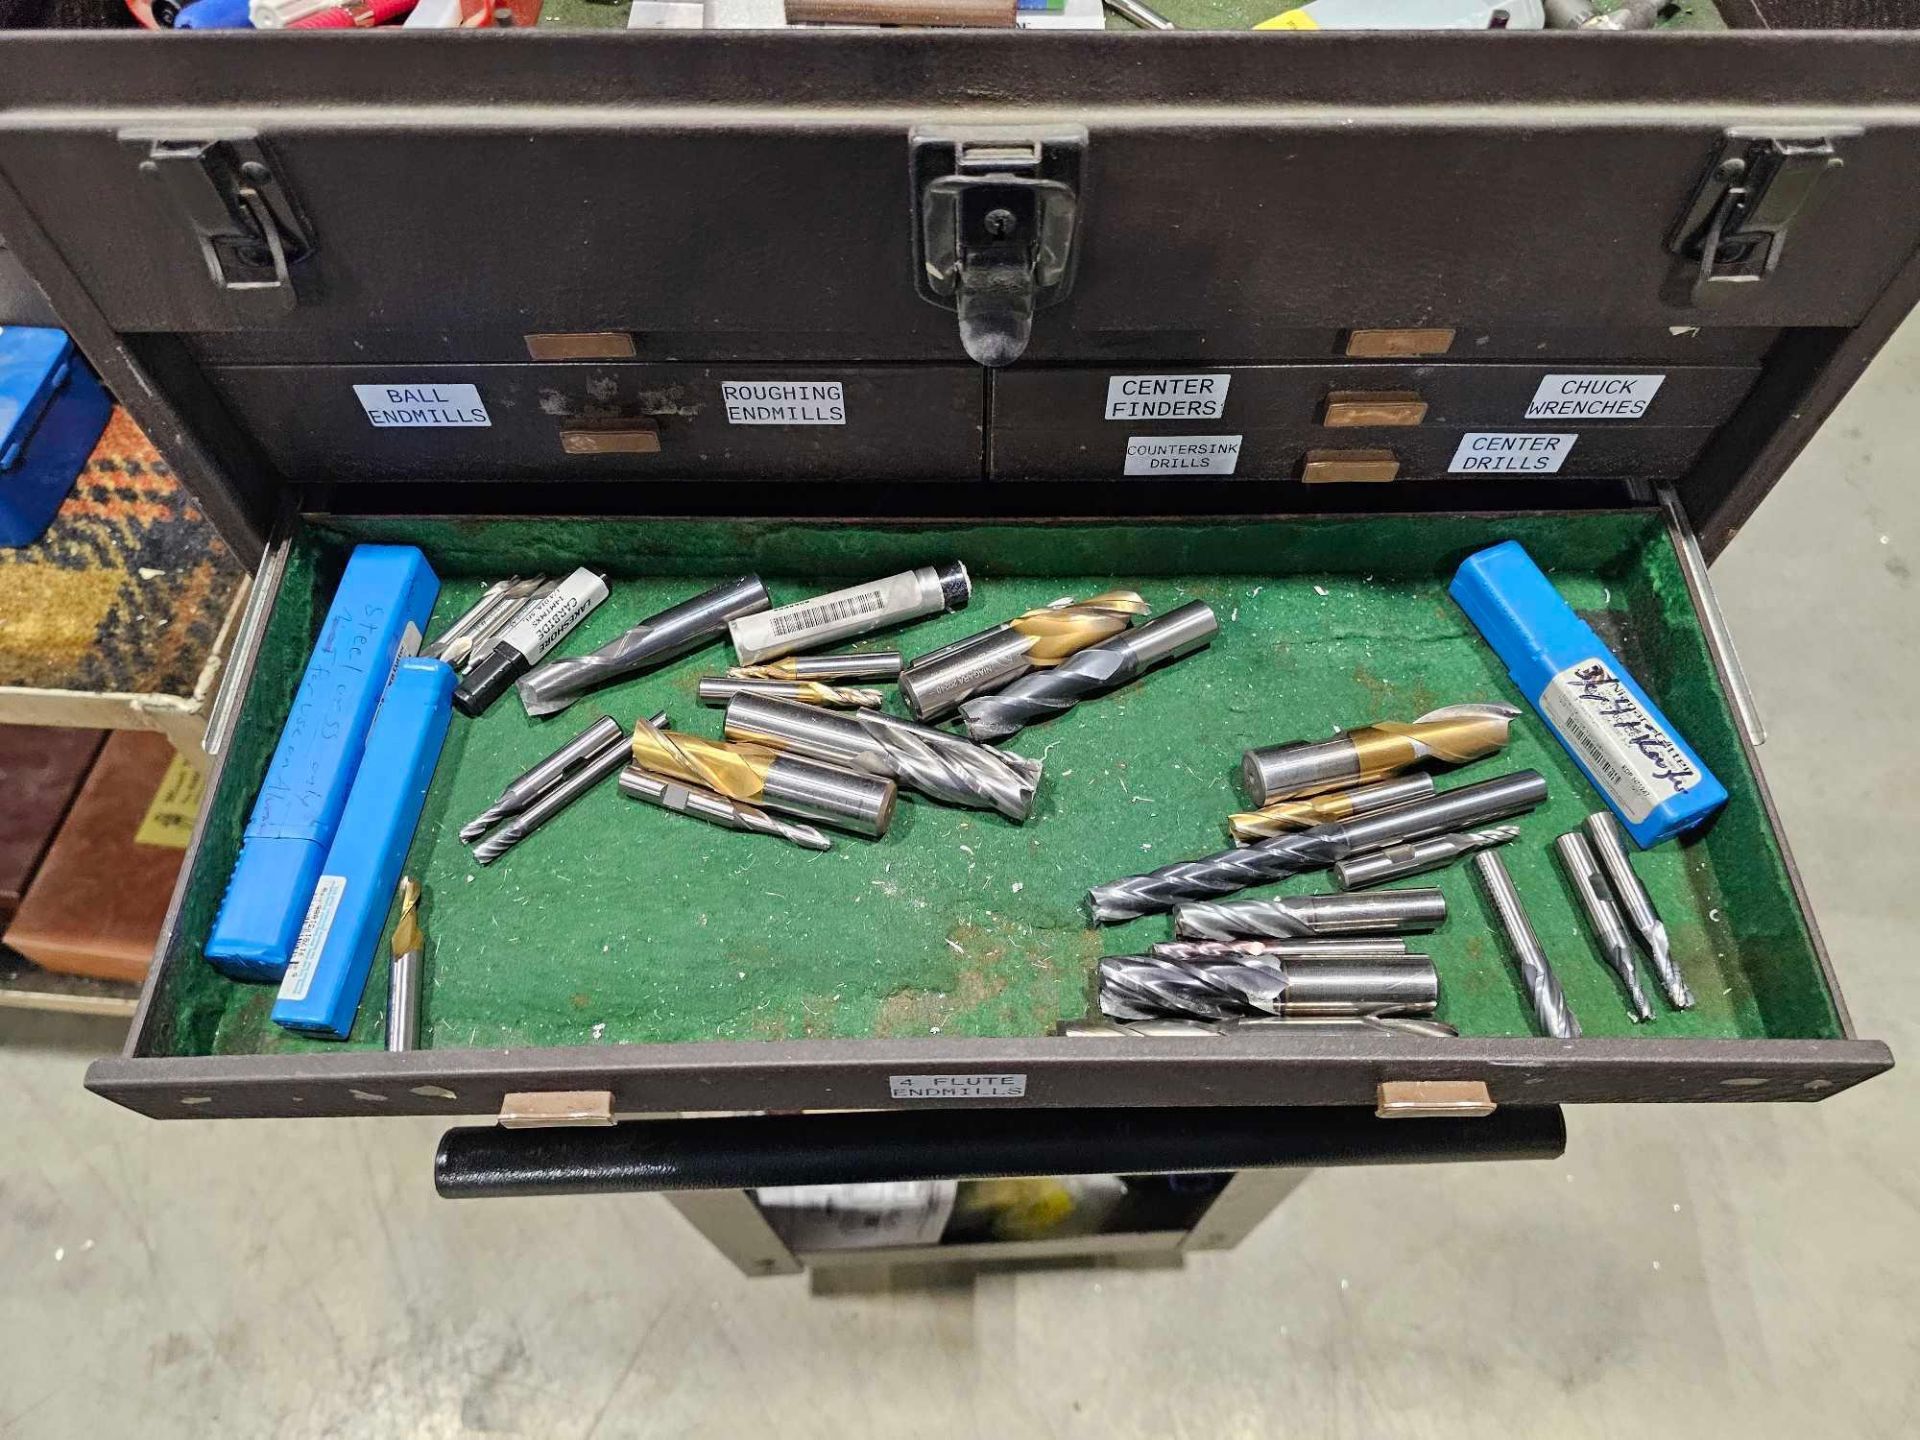 KENNEDY TOOL BOXES LOADED WITH MACHINISTS TOOLS AND MEASURING DEVICES - Image 34 of 45